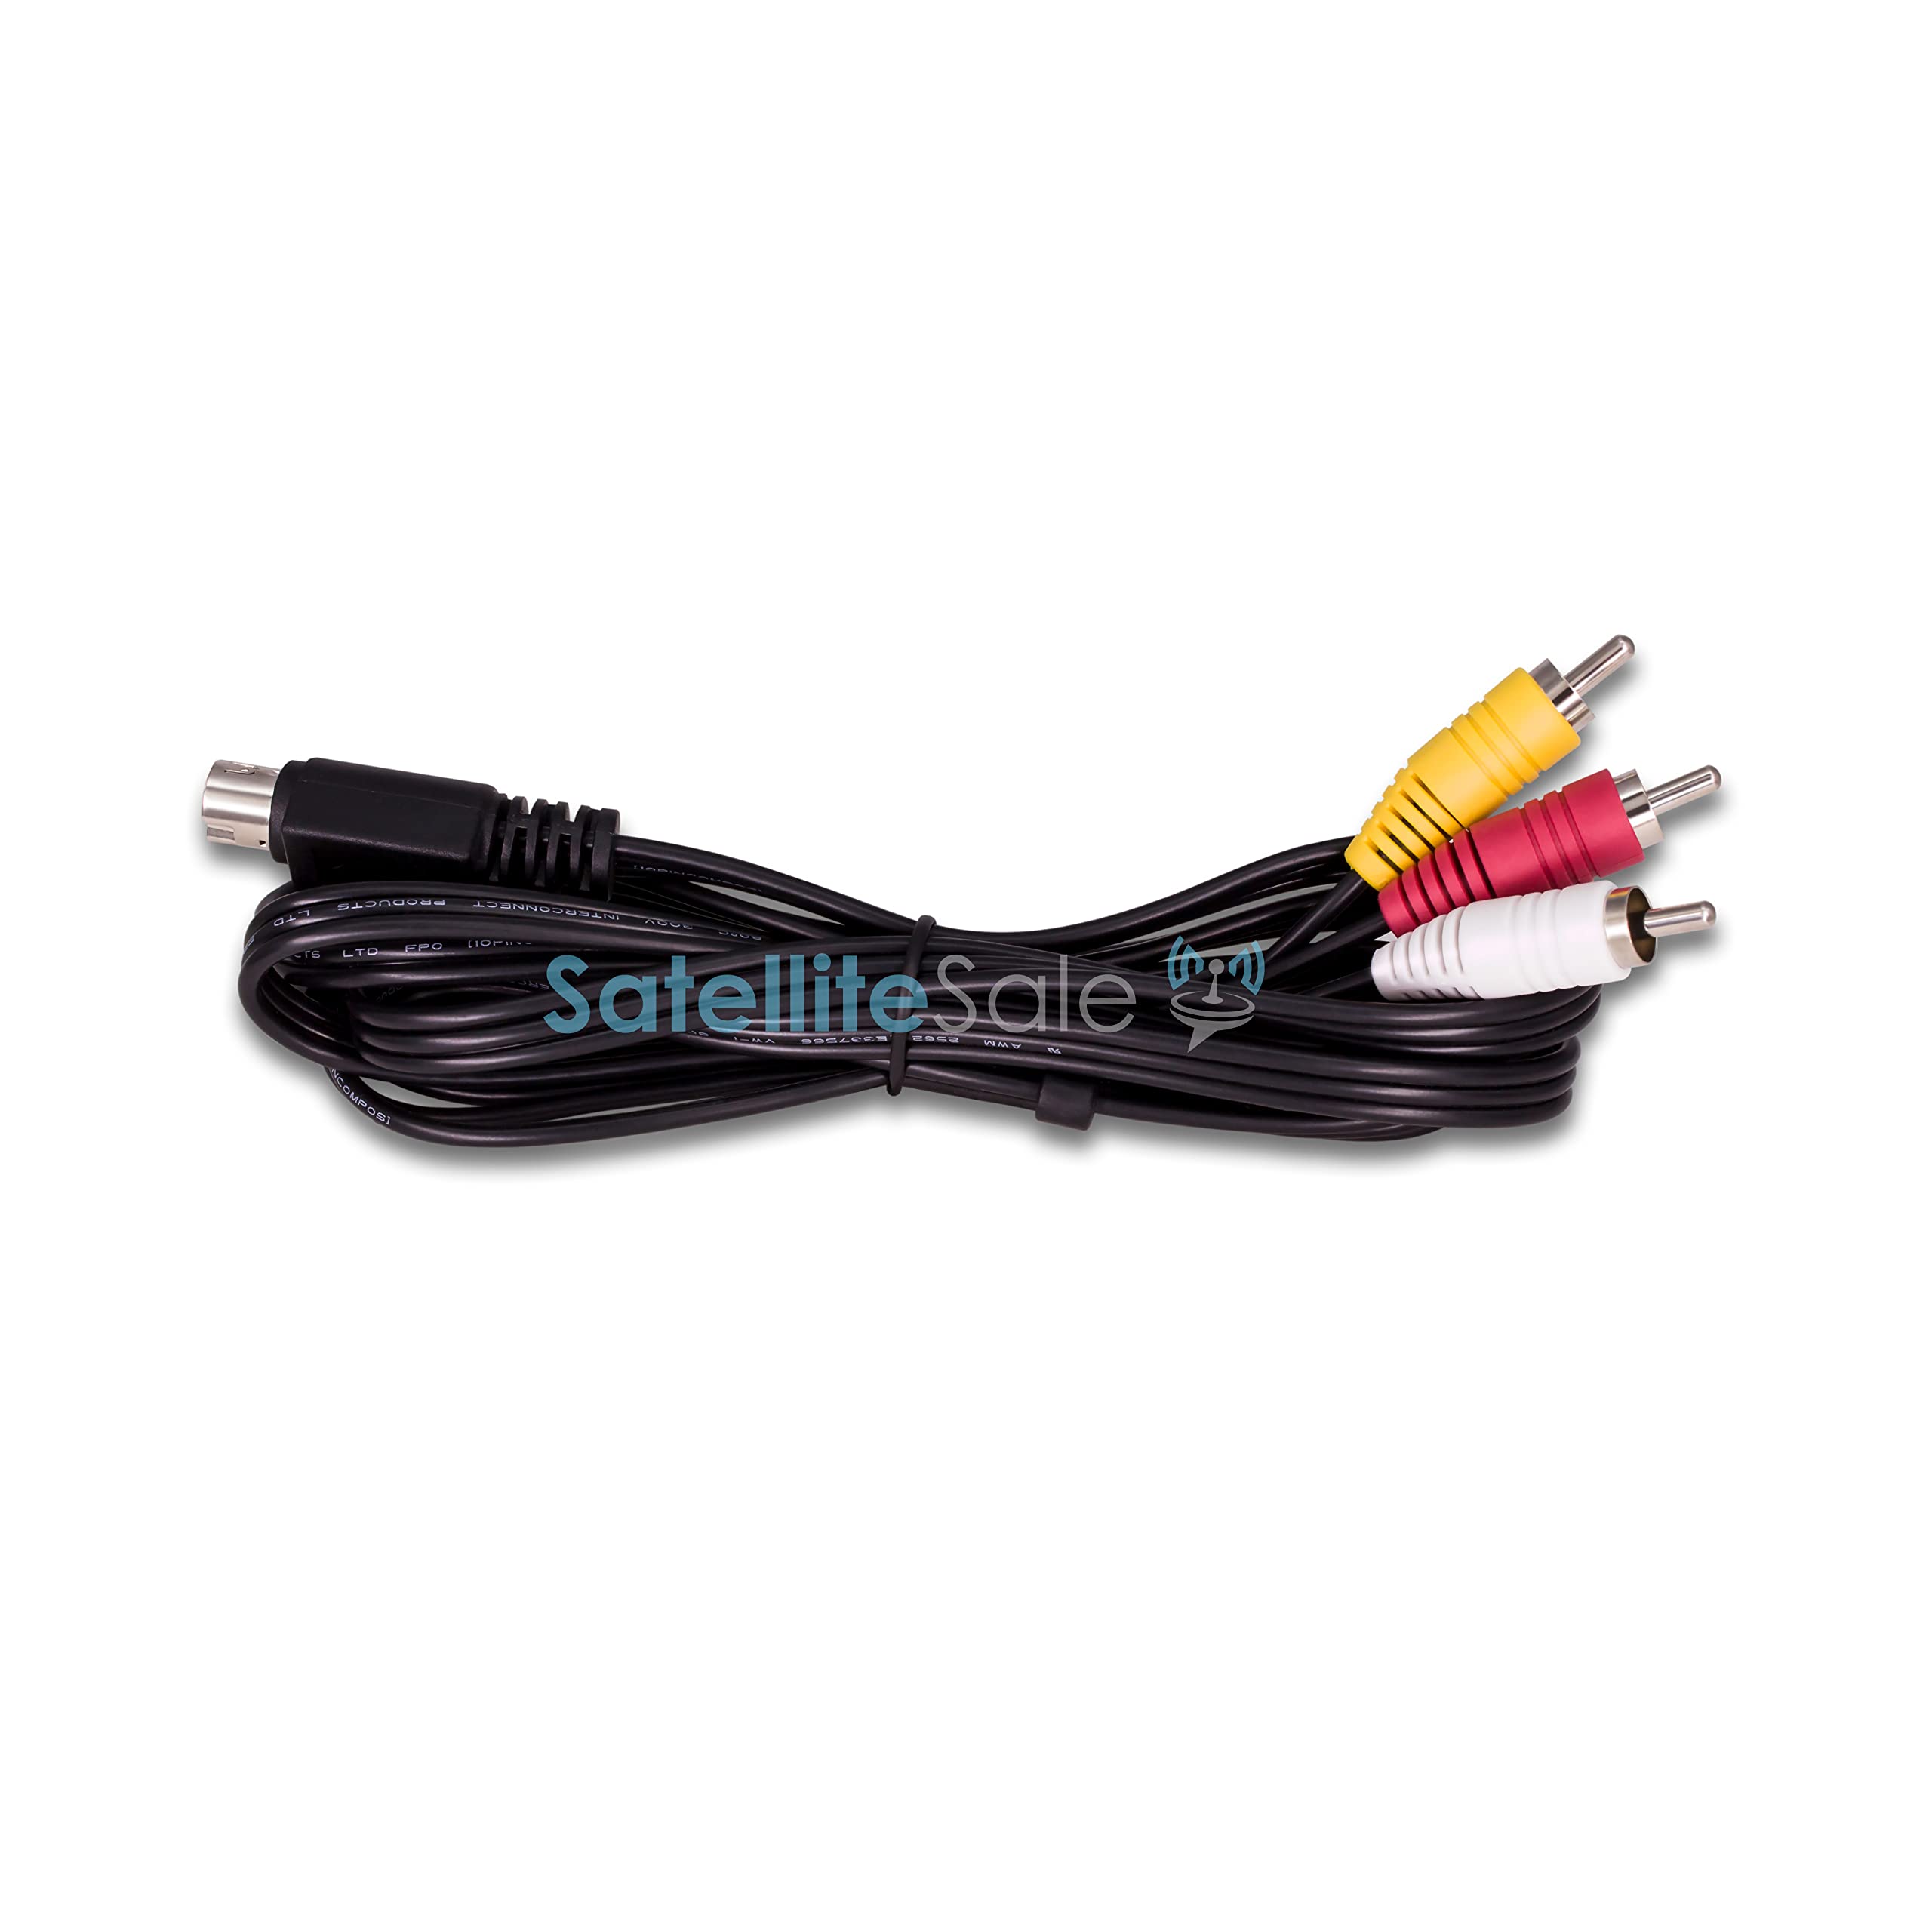 SatelliteSale Audio Video 10 Pin RCA Composite DirecTV Replacement Cable Universal Wire PVC Black Cord 6 feet